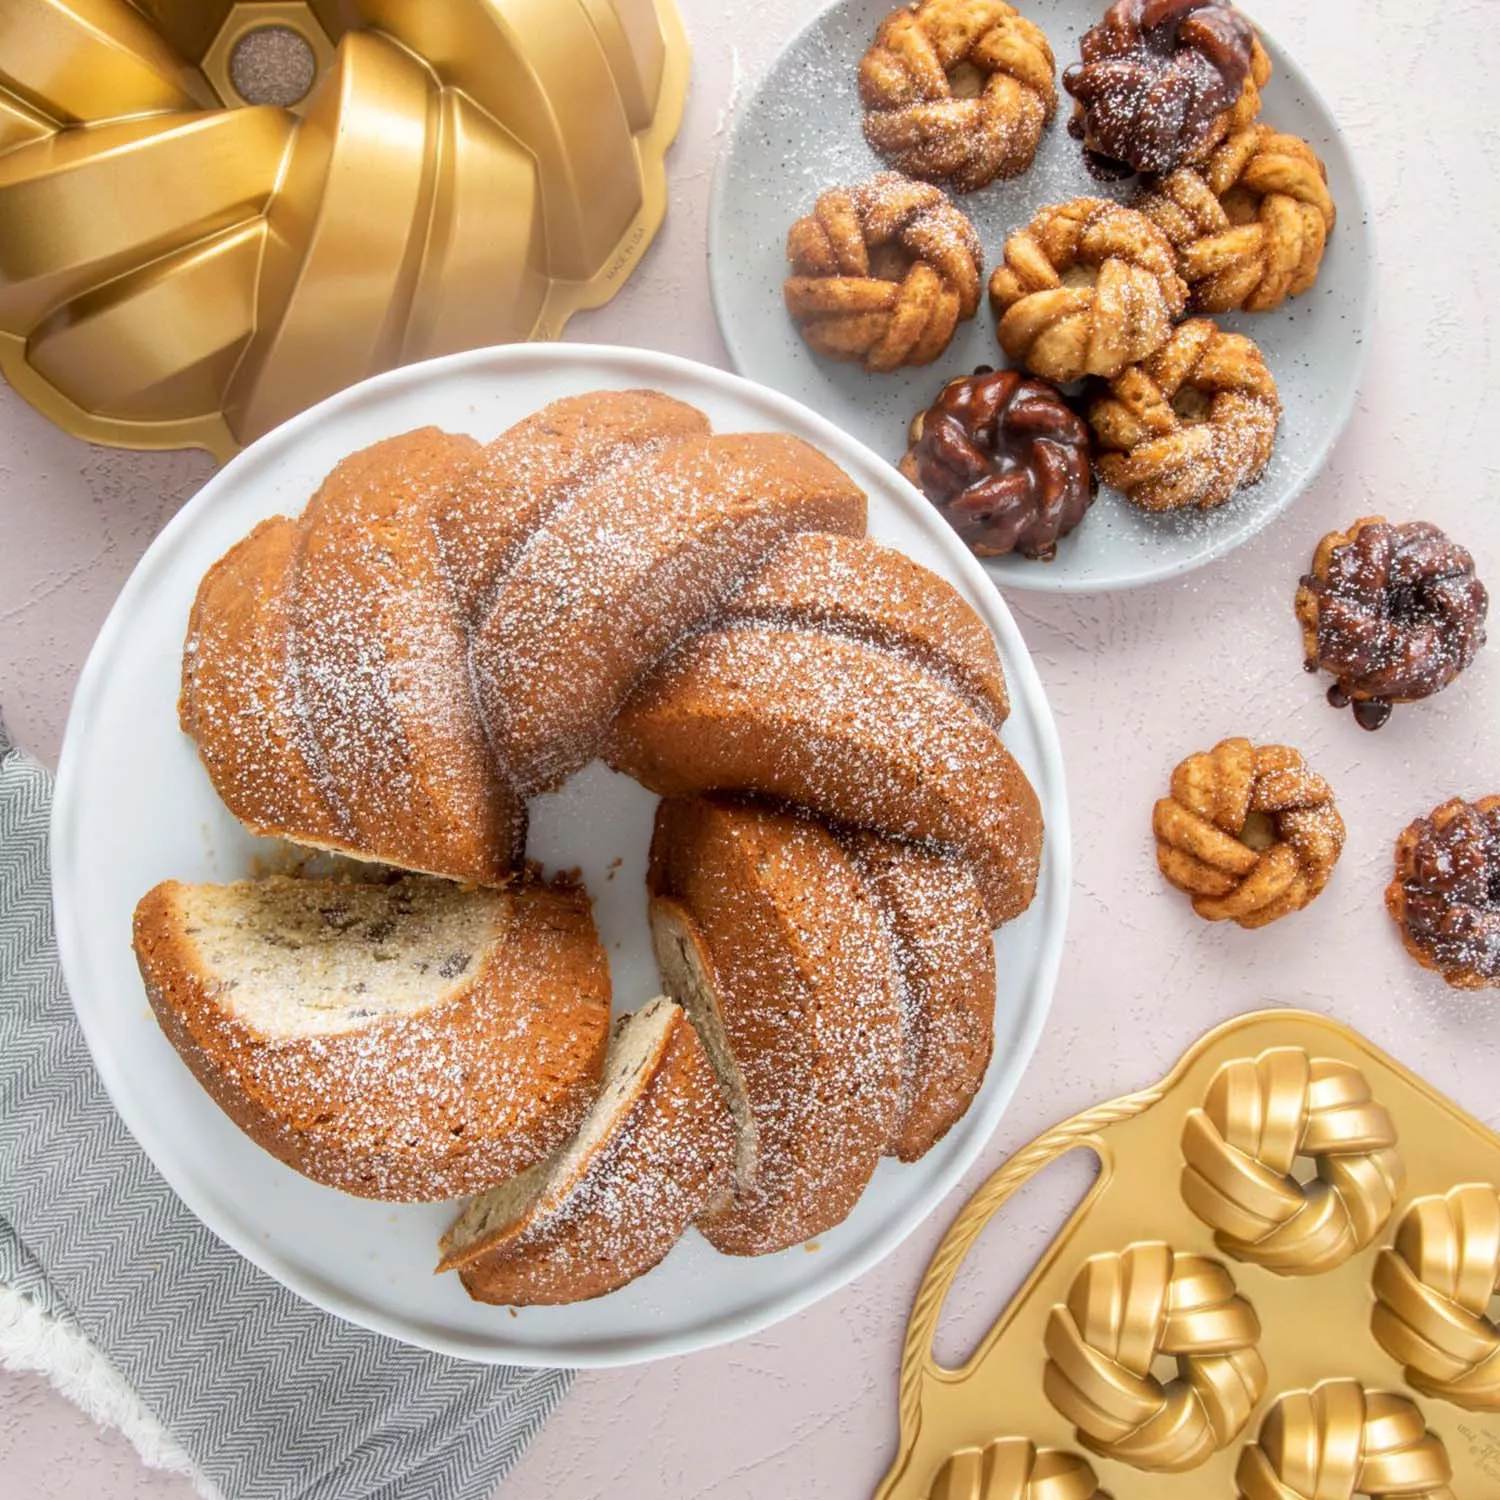 5 Ways with Nordic Ware's Anniversary Bundt Pan - Bake from Scratch